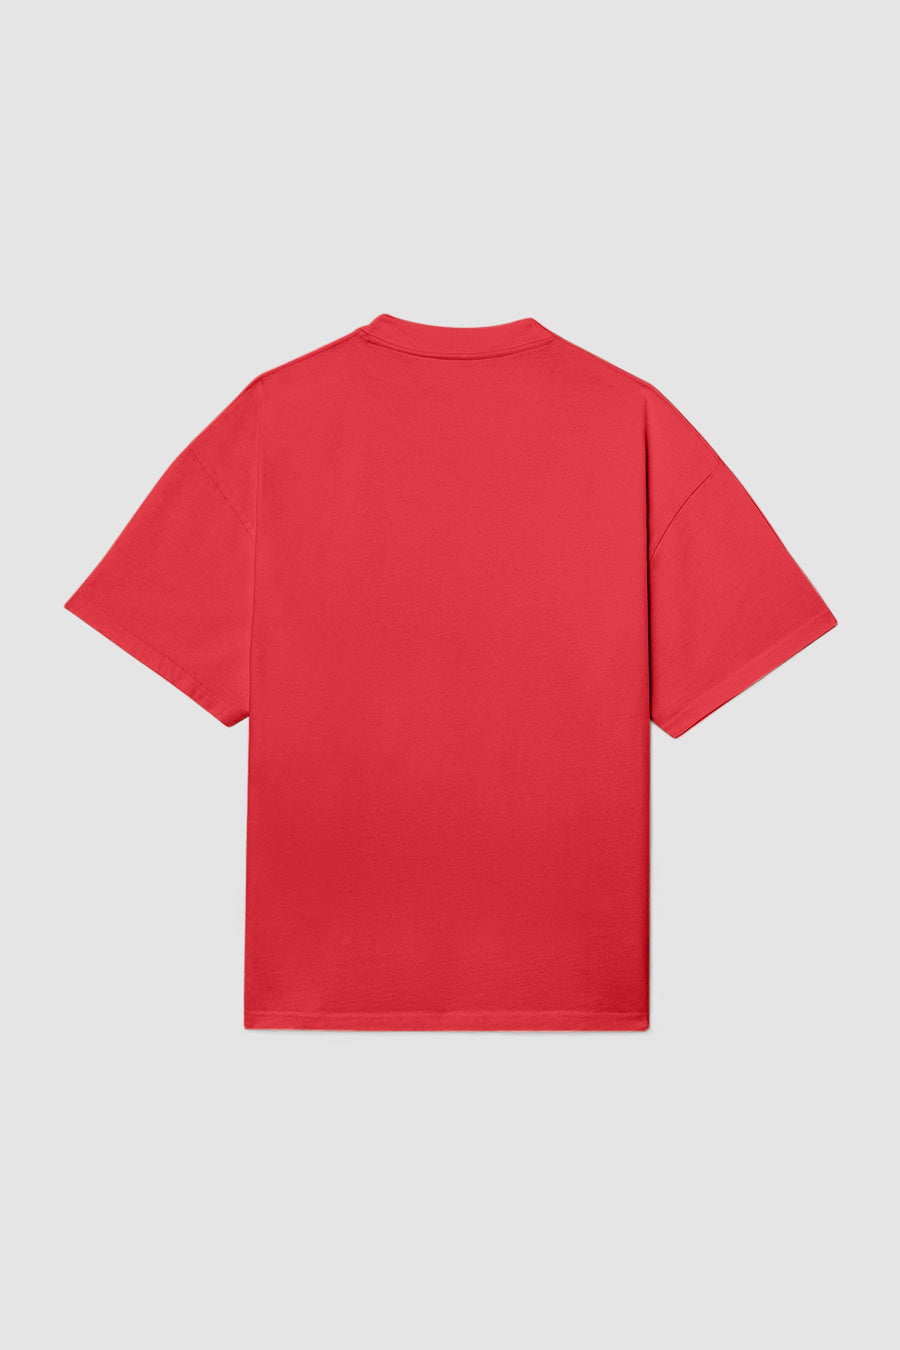 Red Flame T-Shirt - only available in wholesale